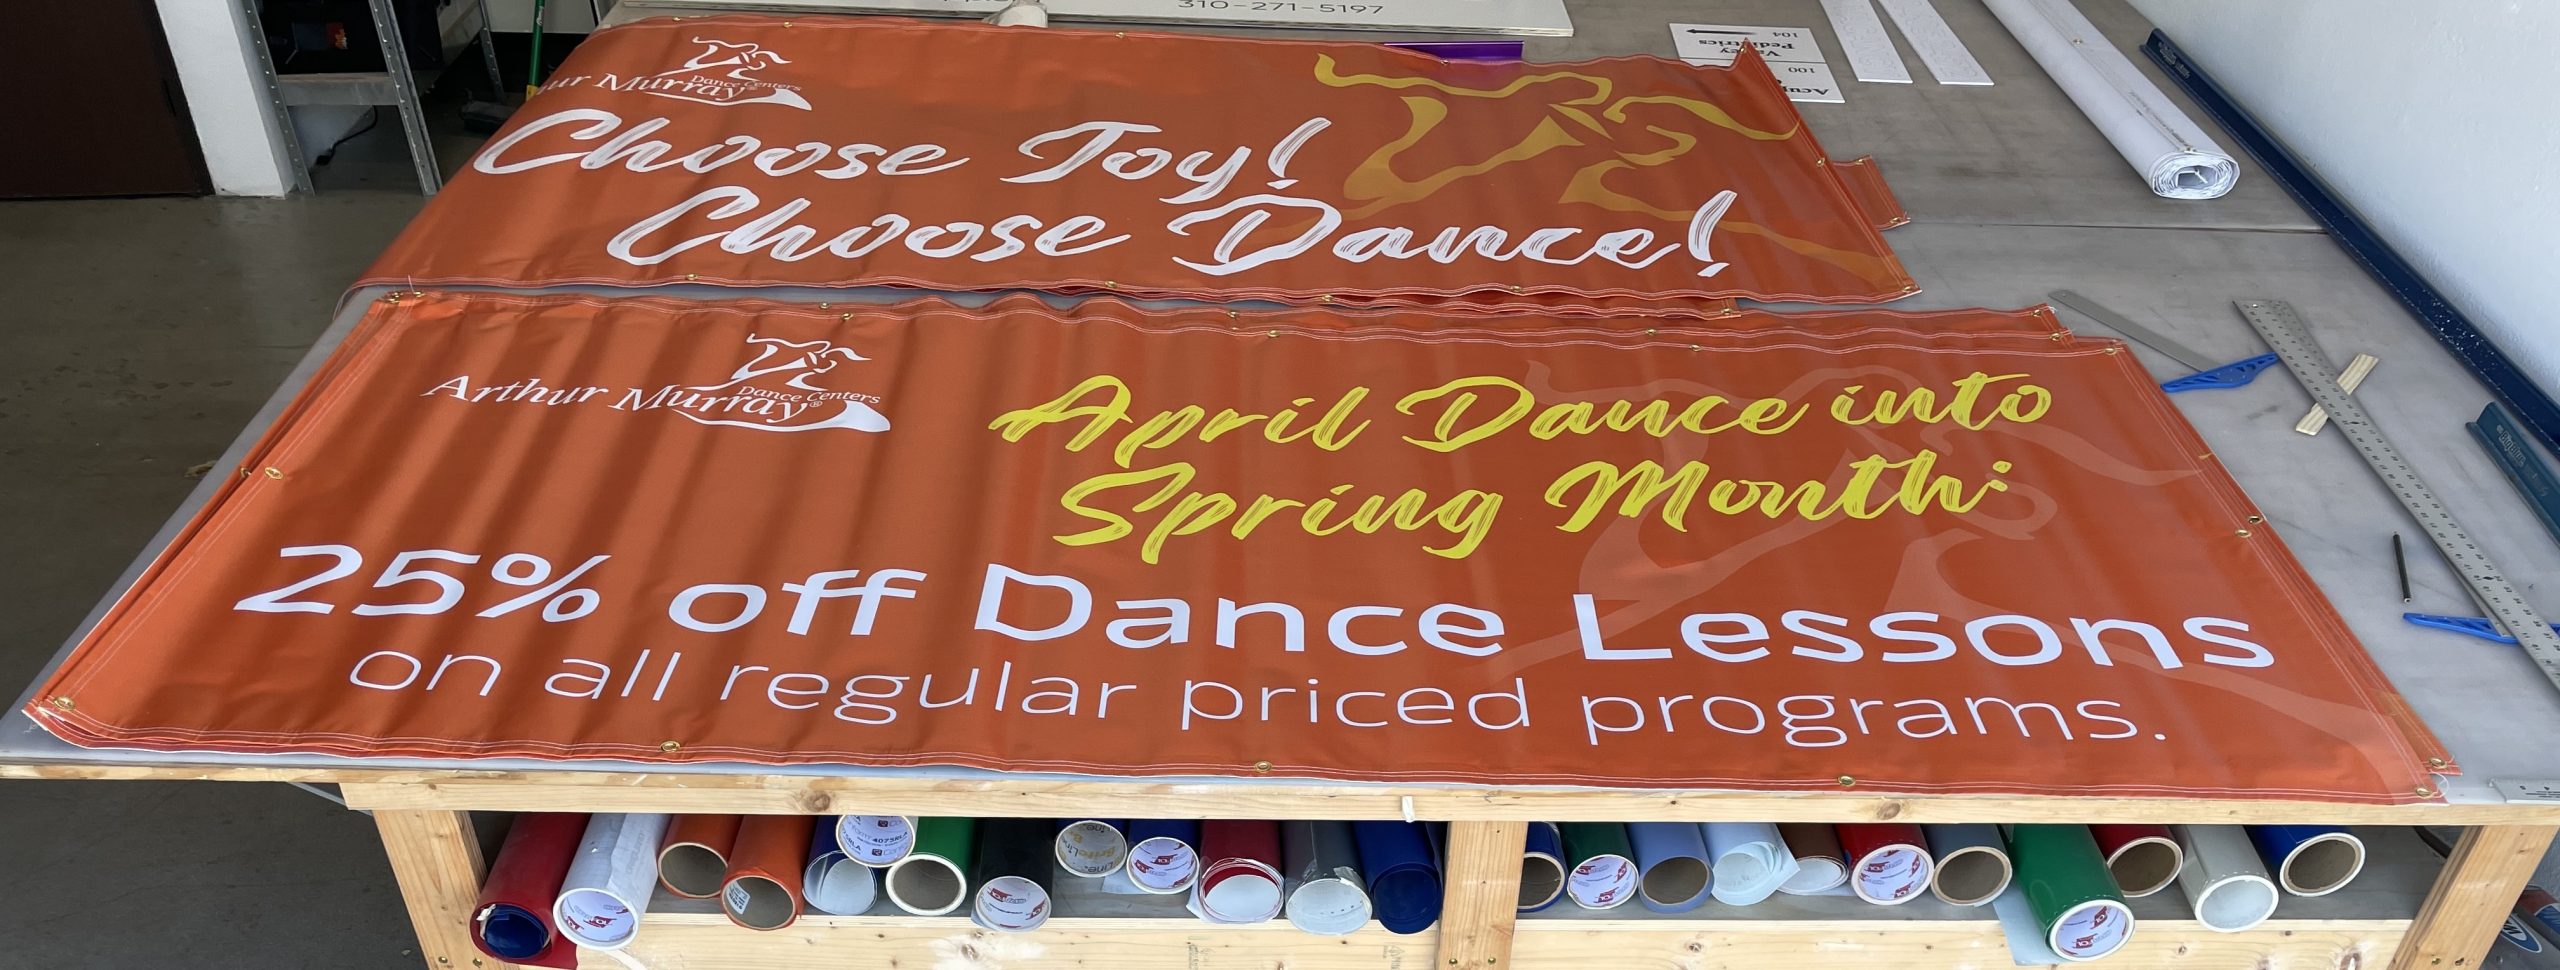 As Arthur Murray prepares to re-open, they created a multi-banner campaign. With this they will attract customers to their Woodland Hills and Thousand Oaks locations.